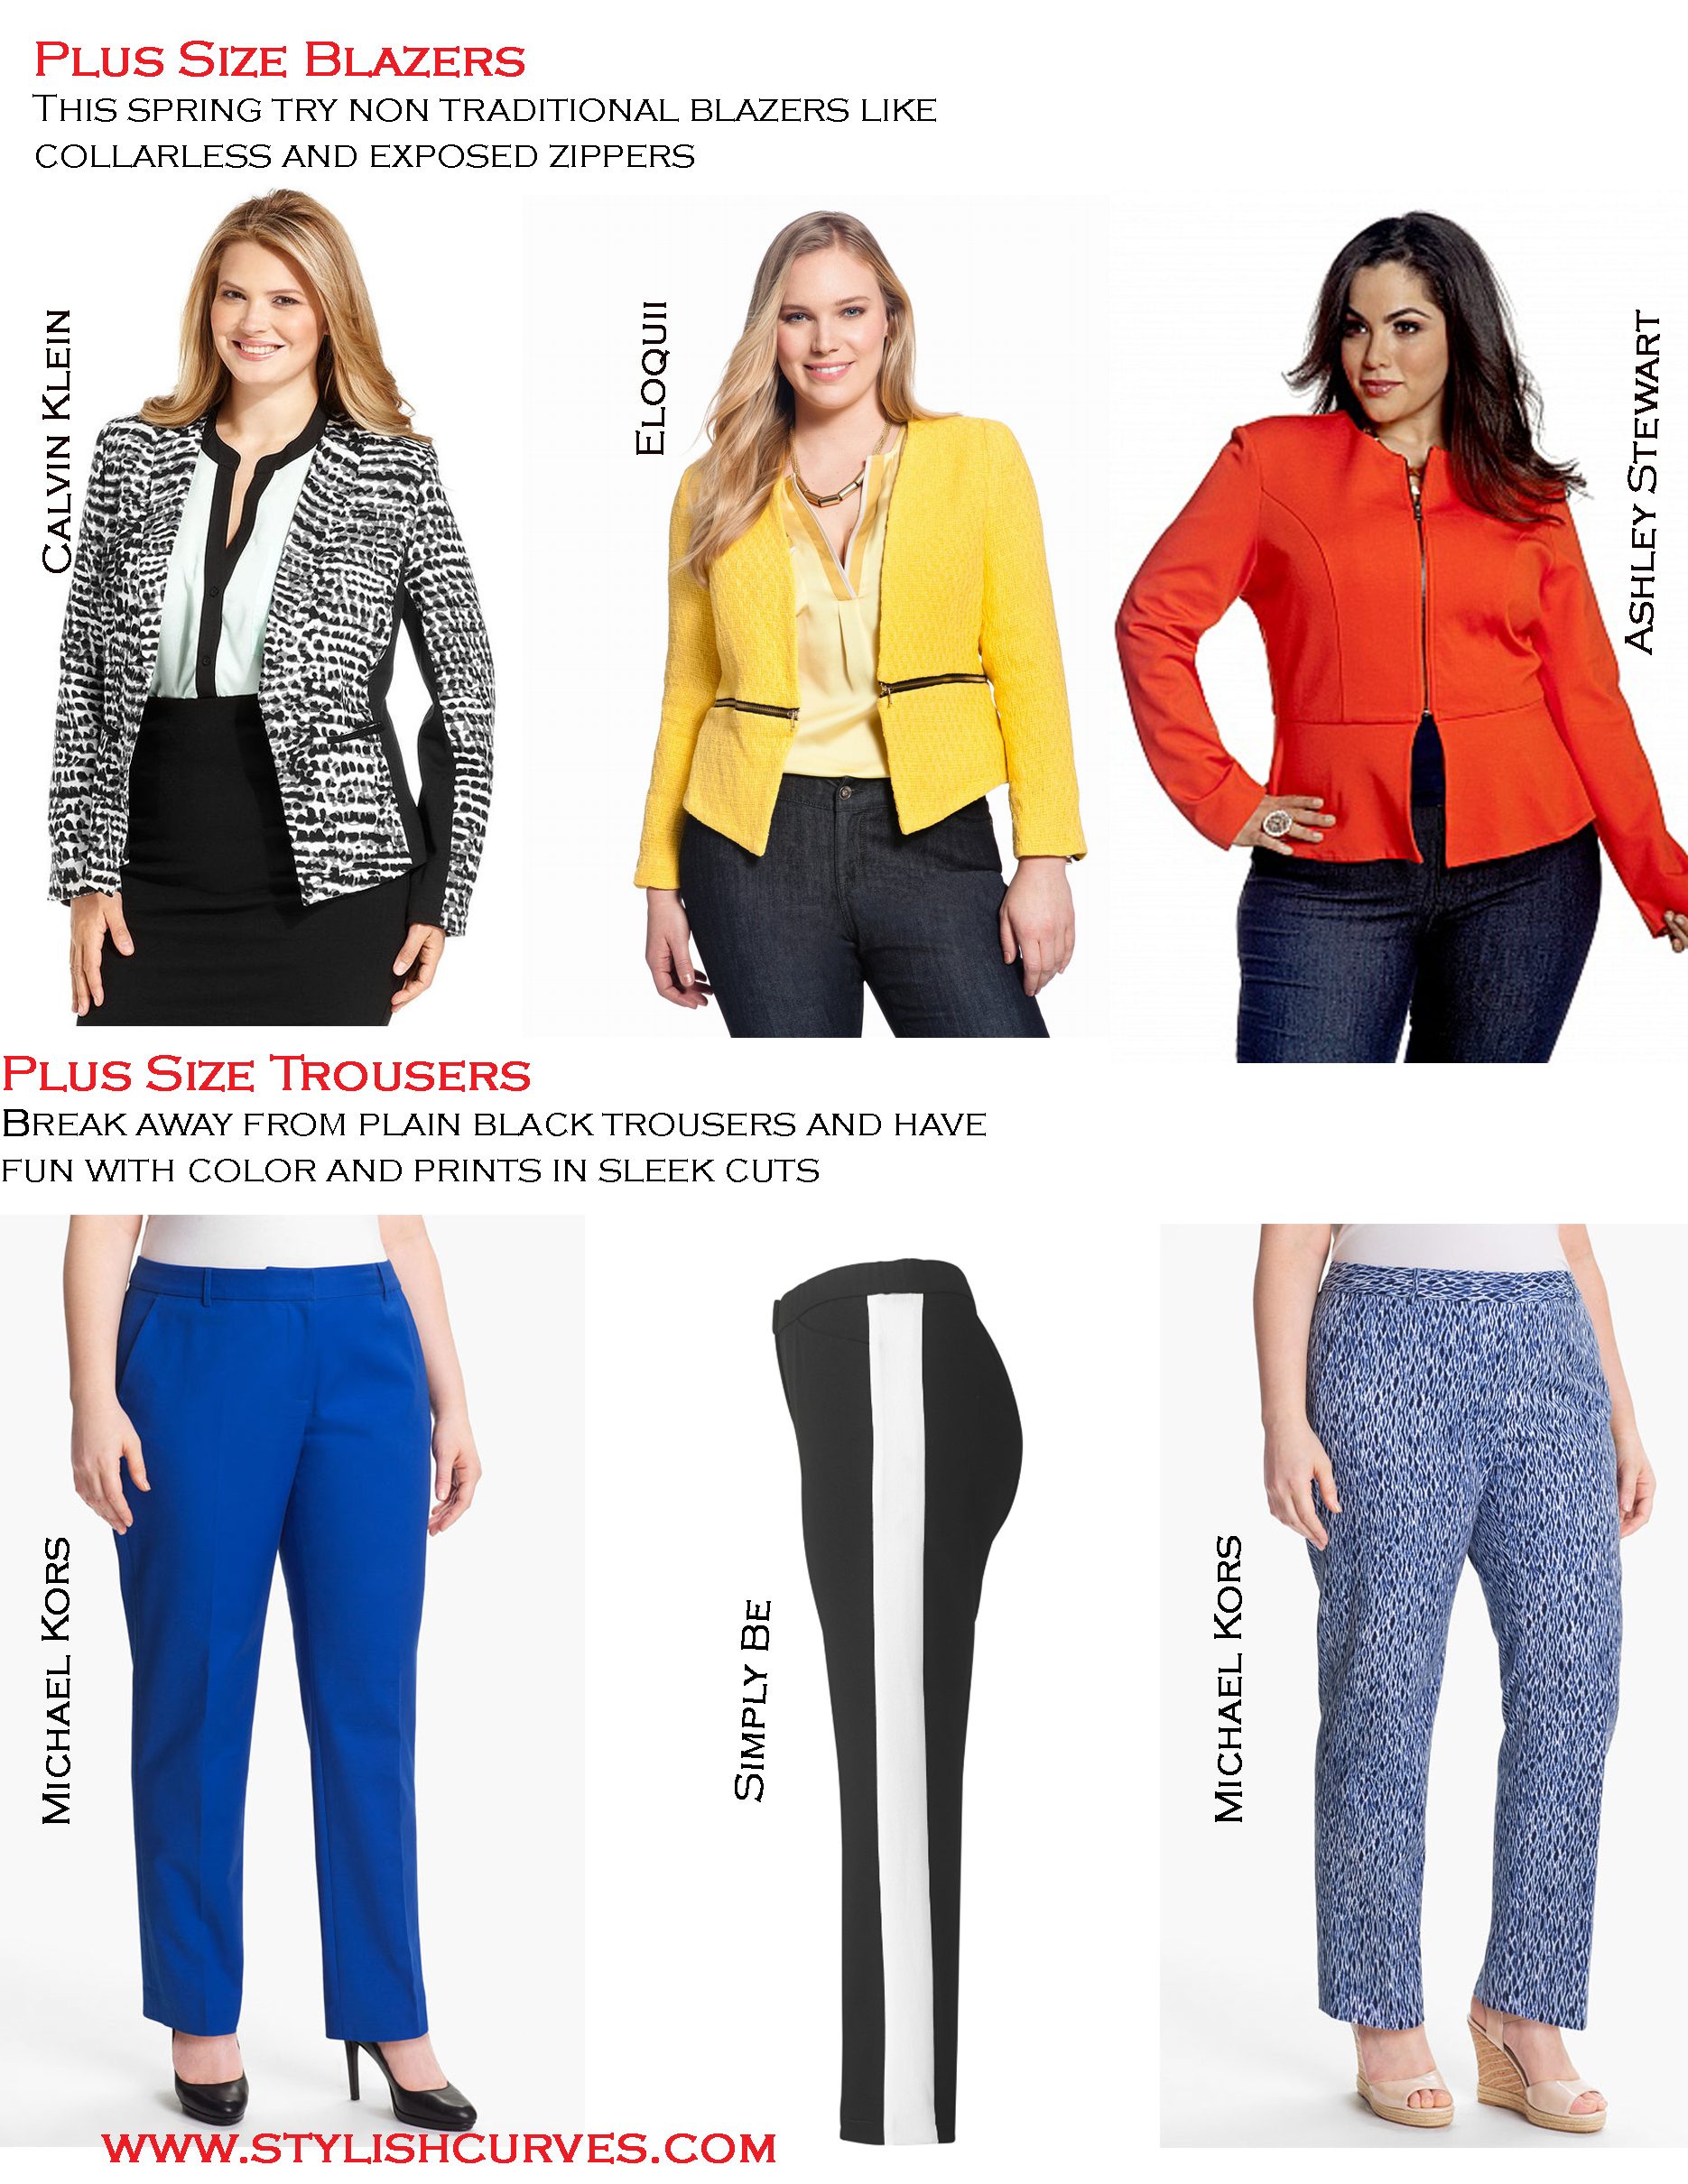 STYLISH CURVES PLUS SIZE SHOPPING GUIDE FOR SPRING OFFICE STYLE ...